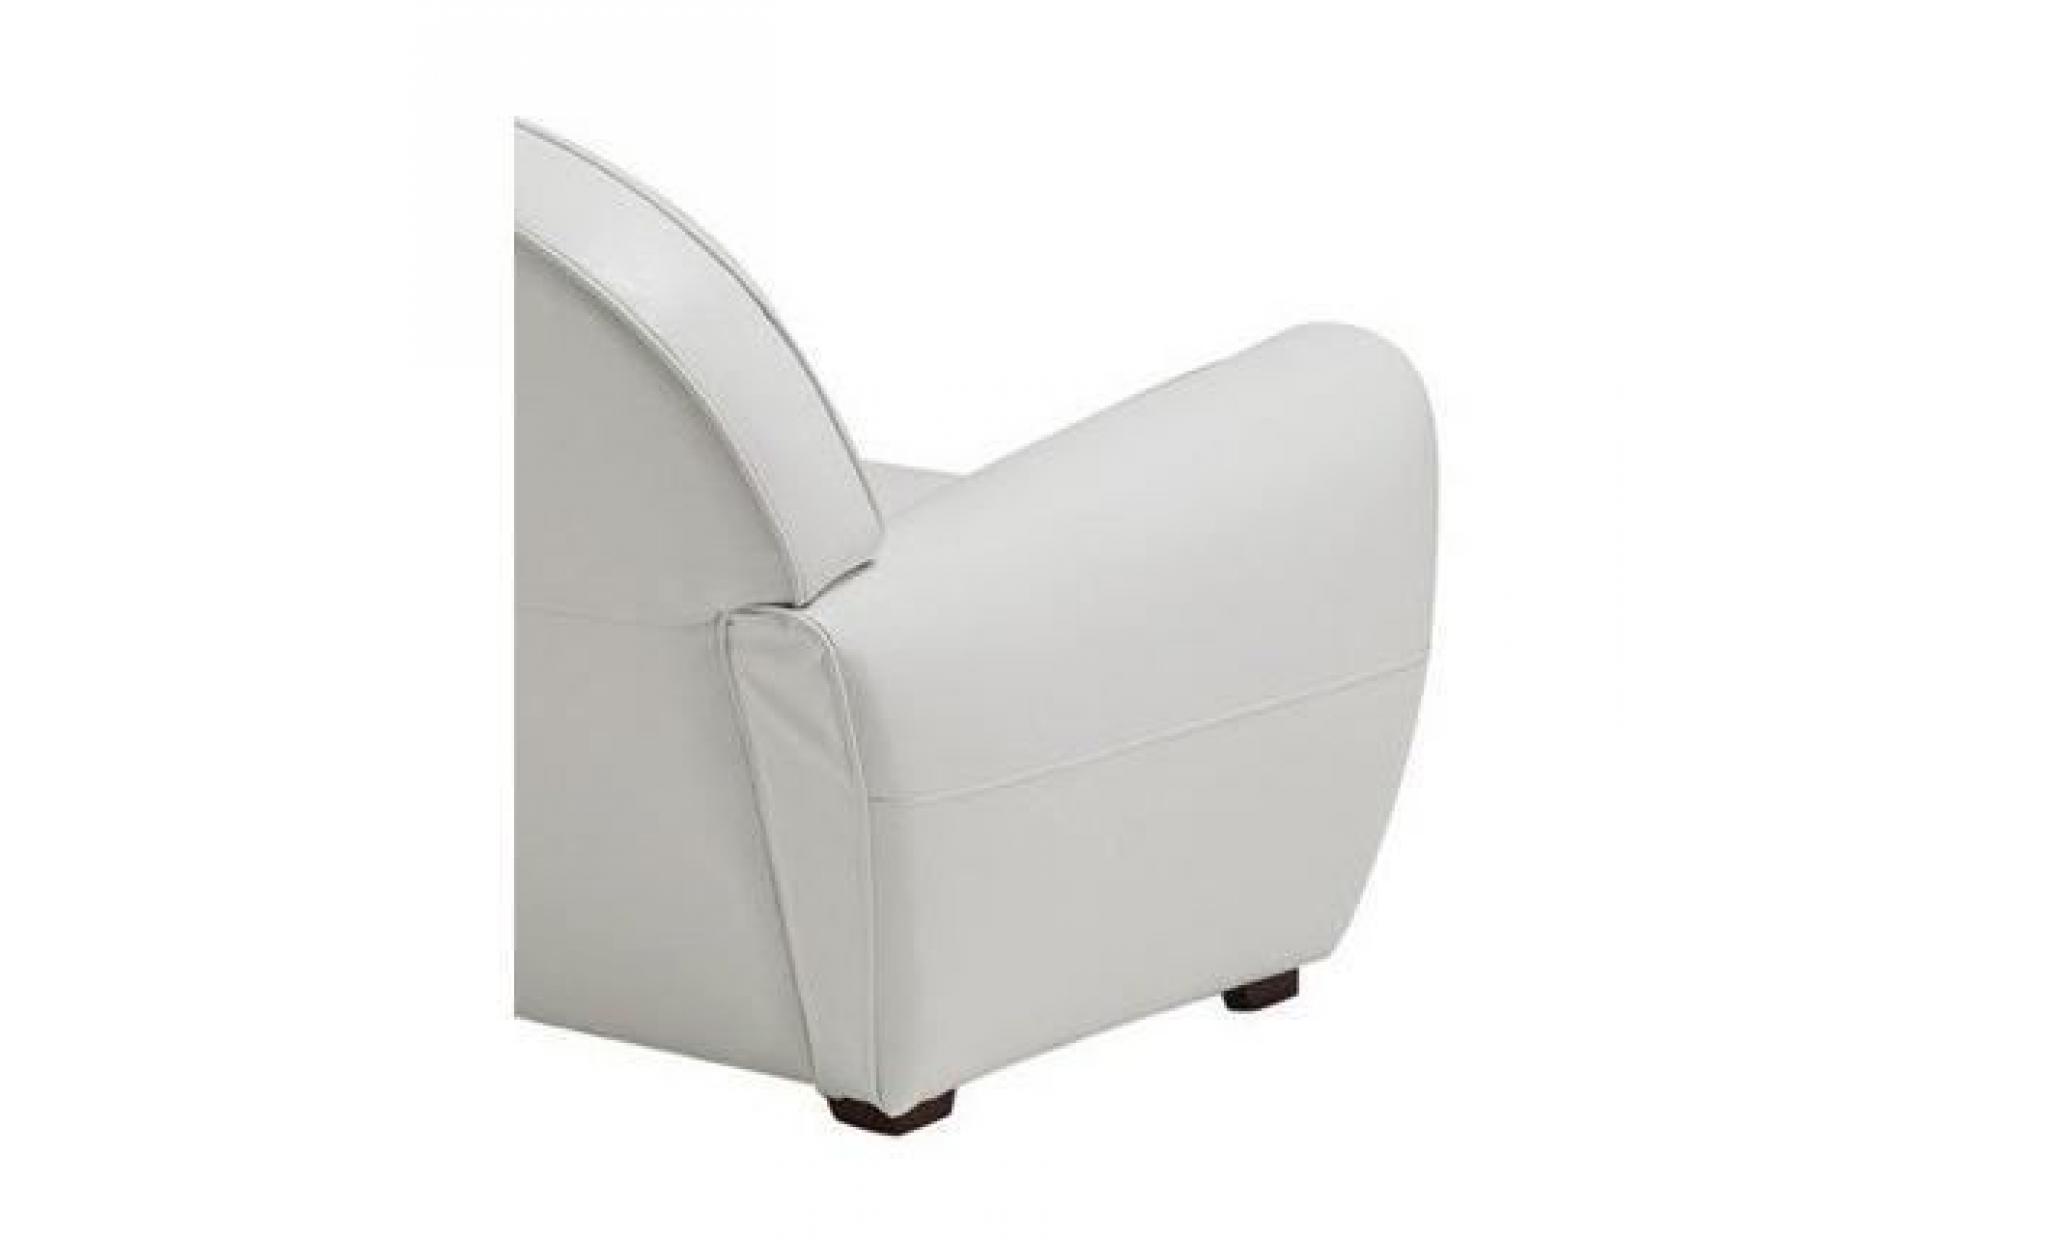 fauteuil club blanc en cuir recyclé. made in italy pas cher